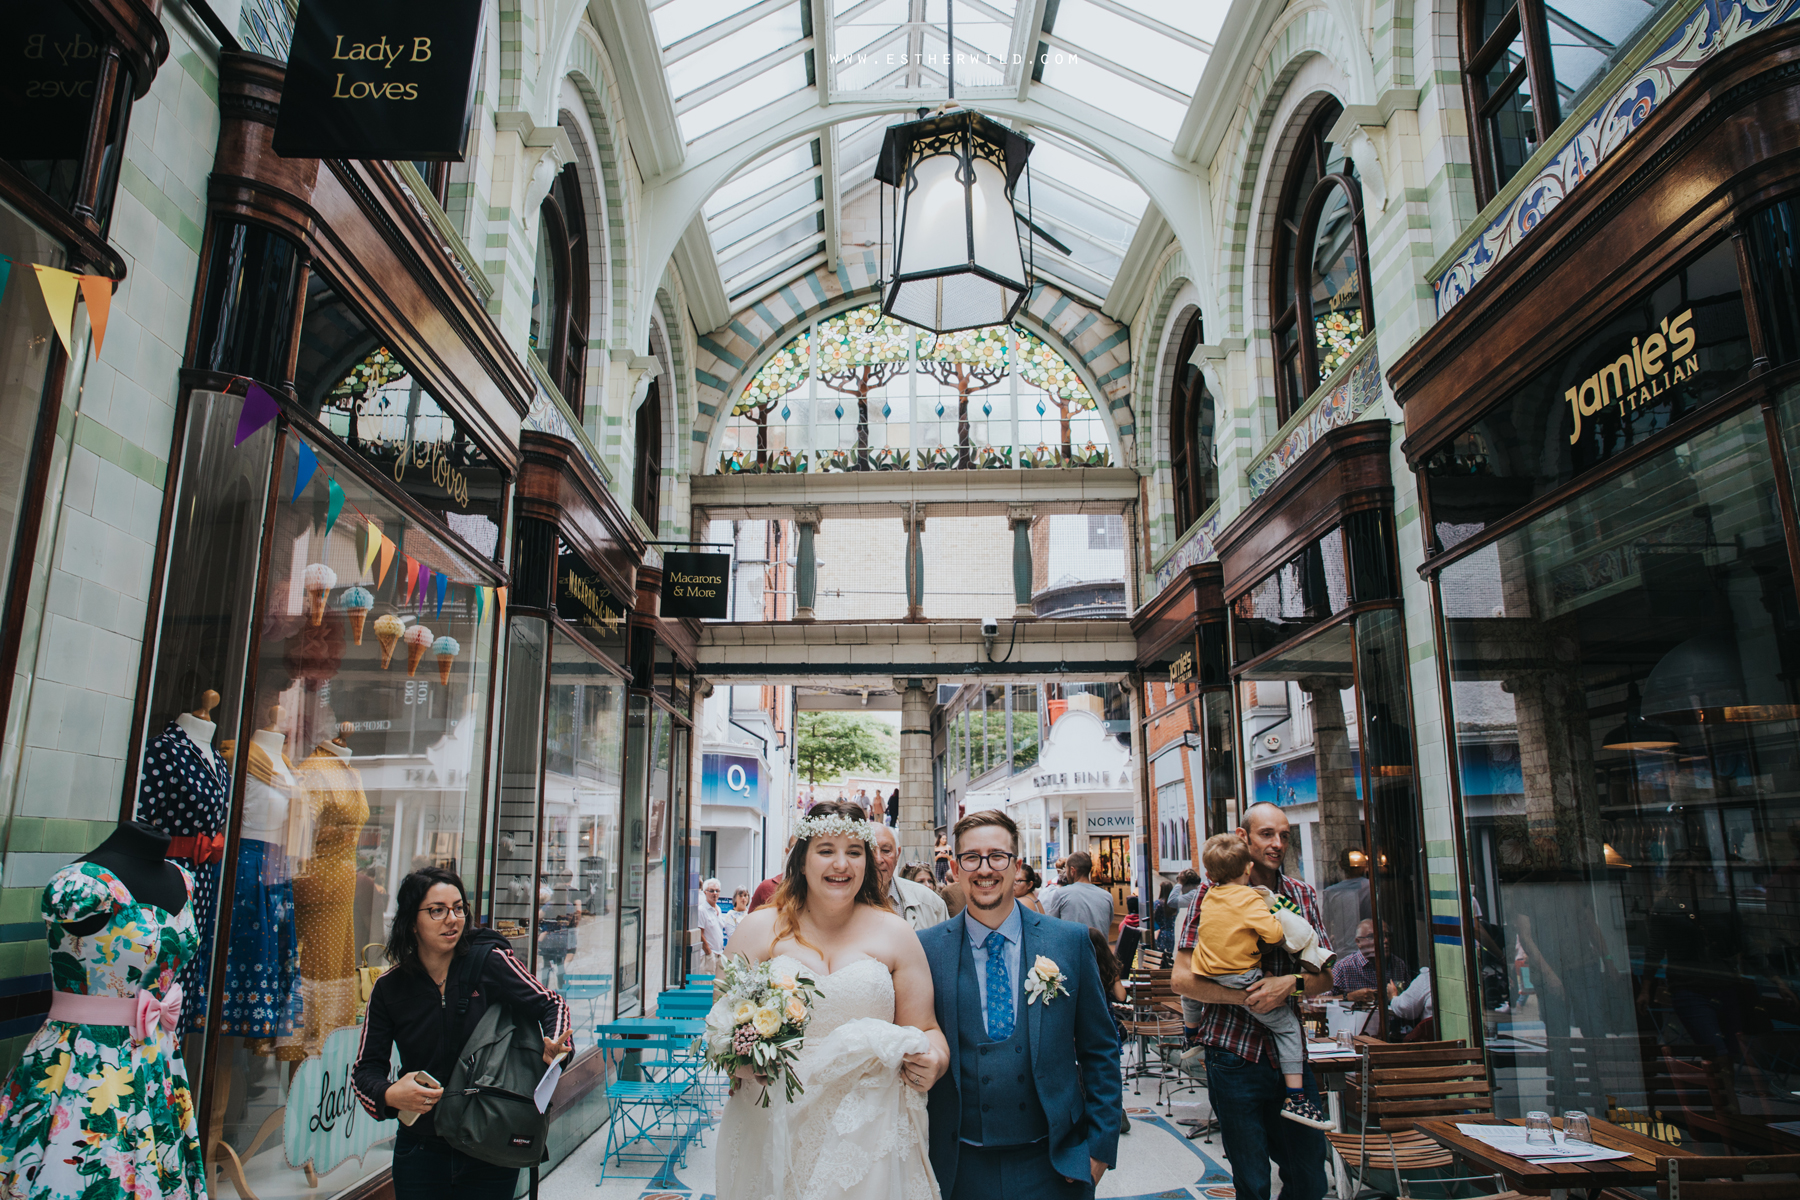 Norwich_Castle_Arcade_Grosvenor_Chip_Birdcage_Cathedral_Cloisters_Refectory_Wedding_Photography_Esther_Wild_Photographer_Norfolk_Kings_Lynn_3R8A1291.jpg